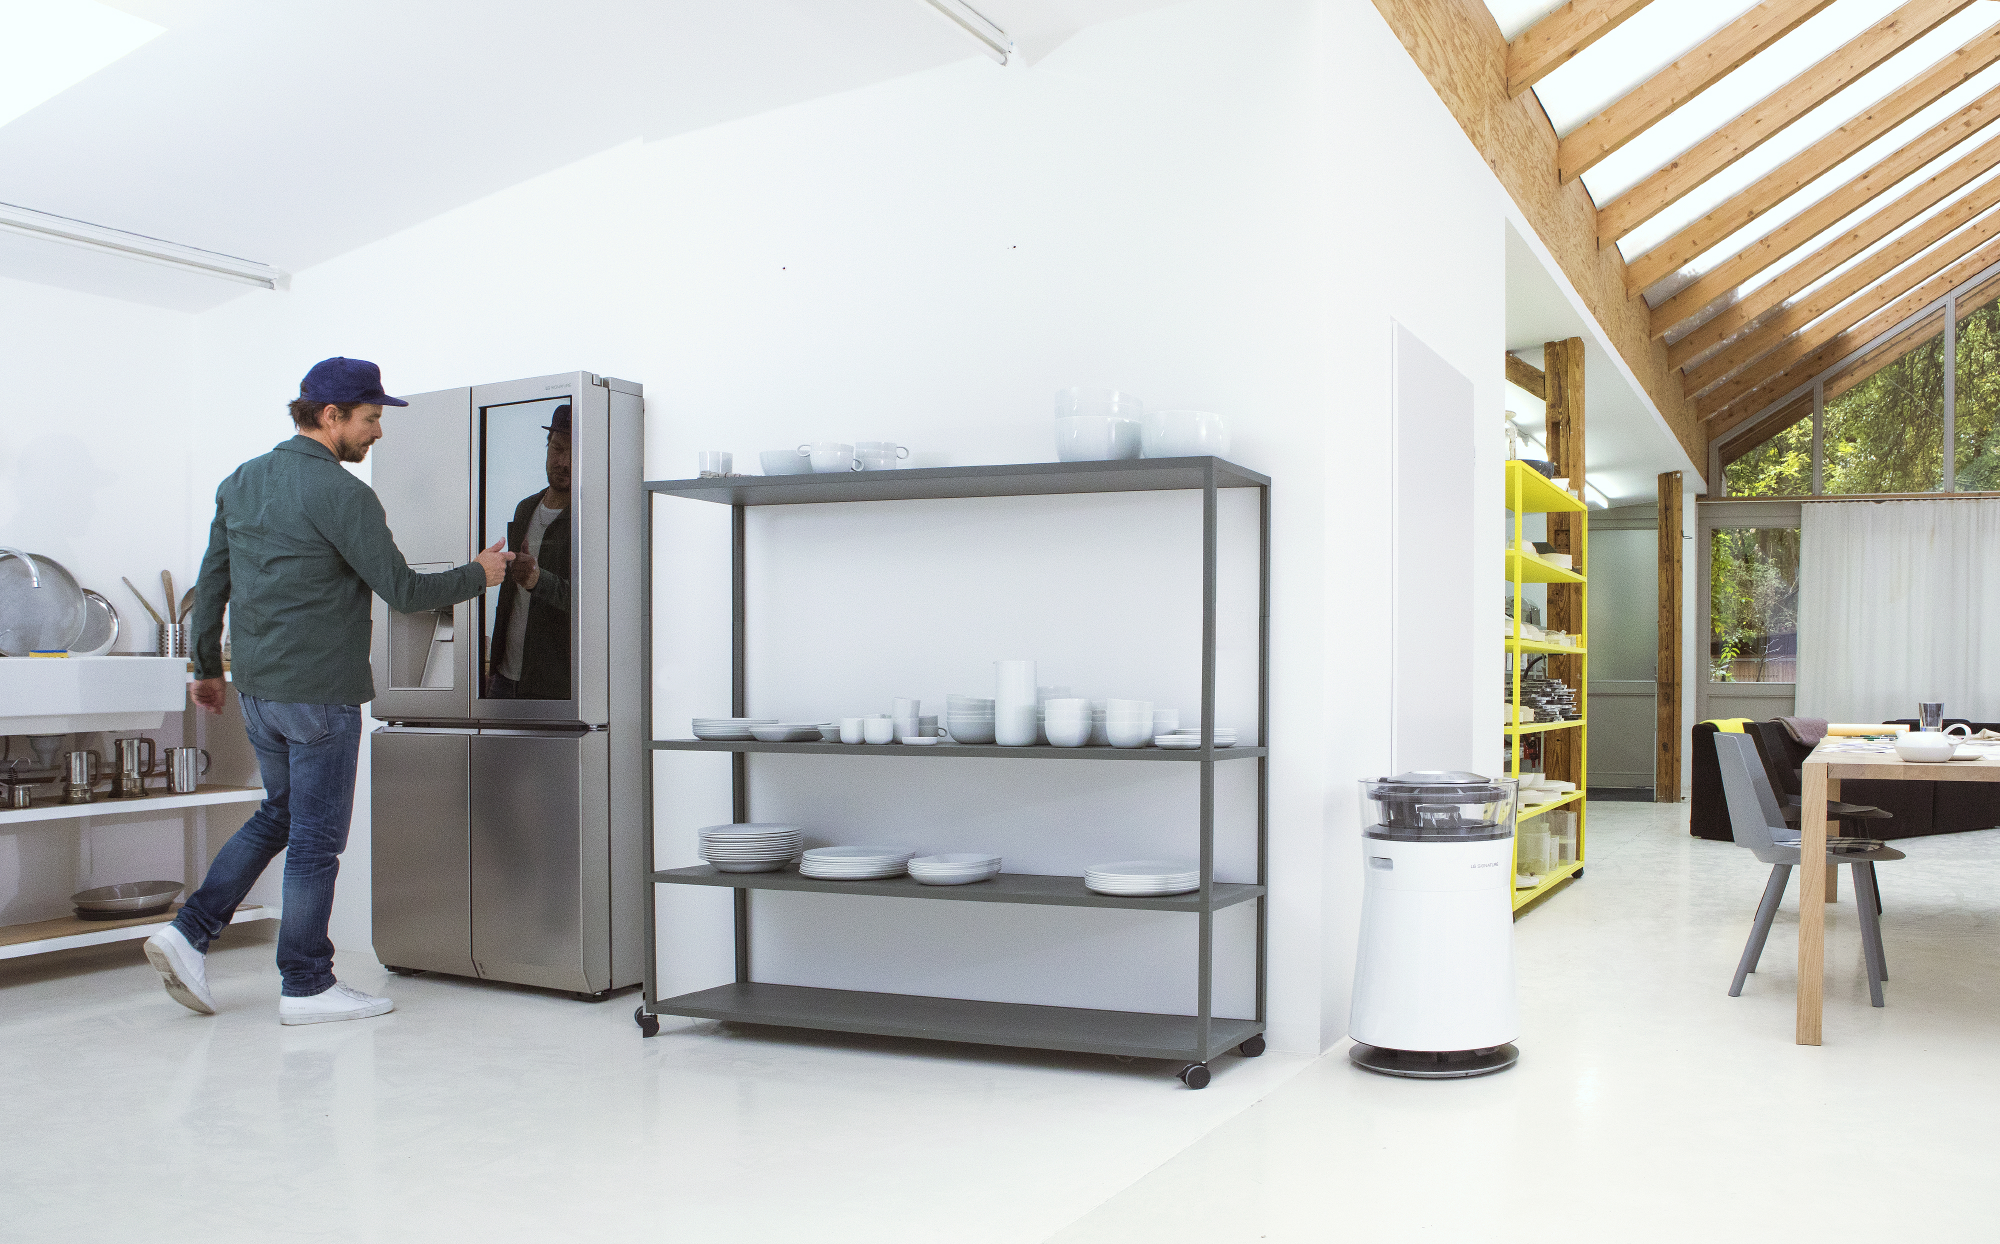 The innovative LG SIGNATURE refrigerator with sophisticated ‘InstaView-Door-in-Door’ functionality looks perfect in the kitchen of designer Stefan Diez (Photo: LG SIGNATURE)